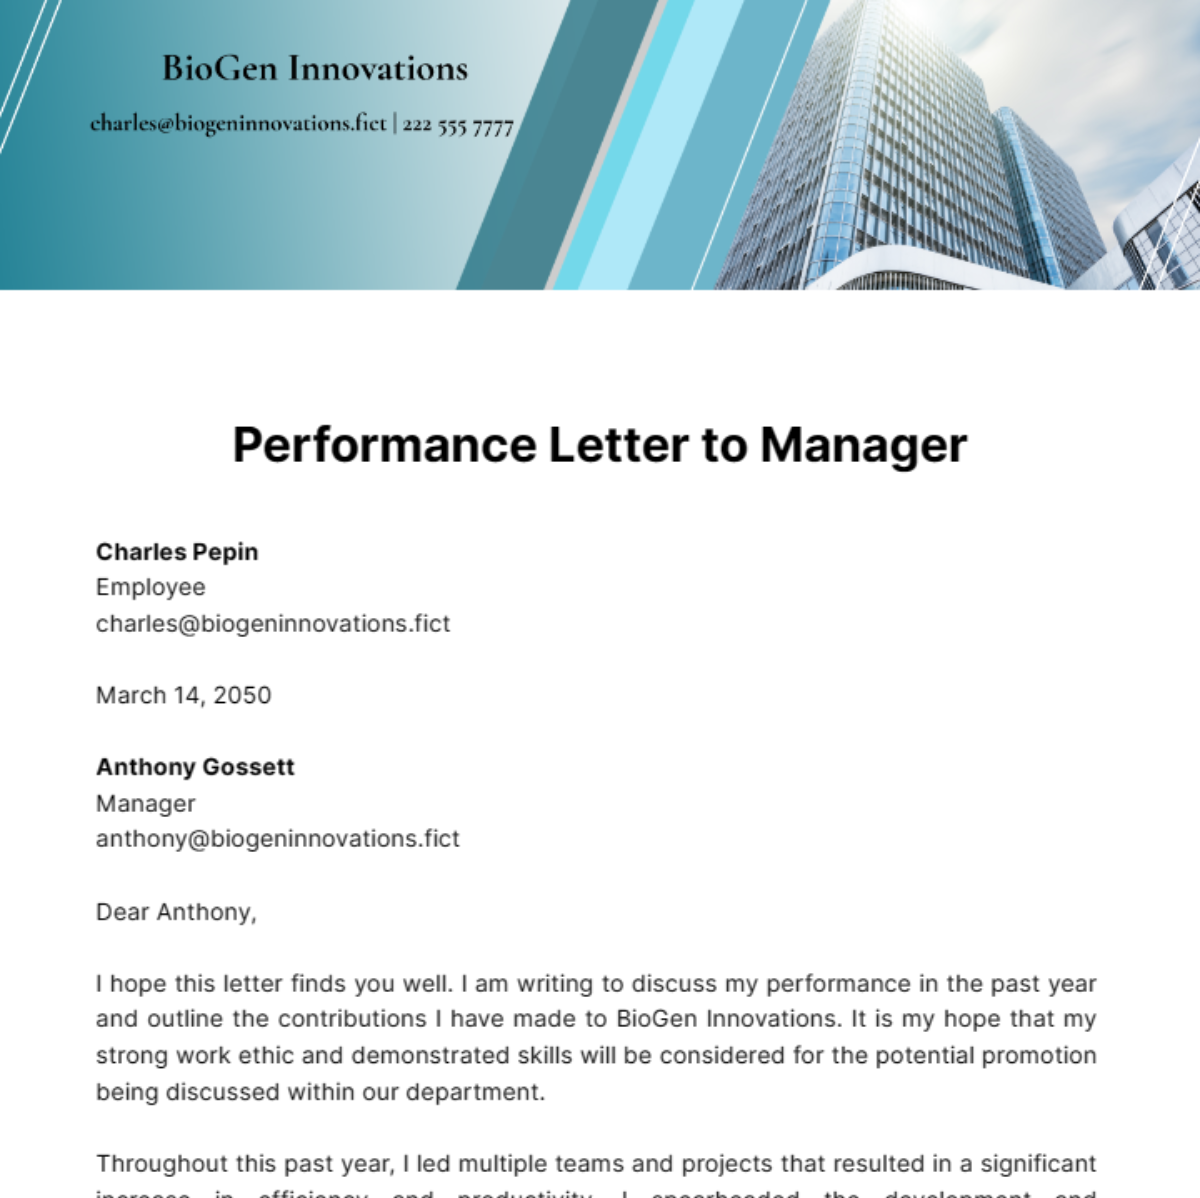 Free Performance Letter to Manager Template